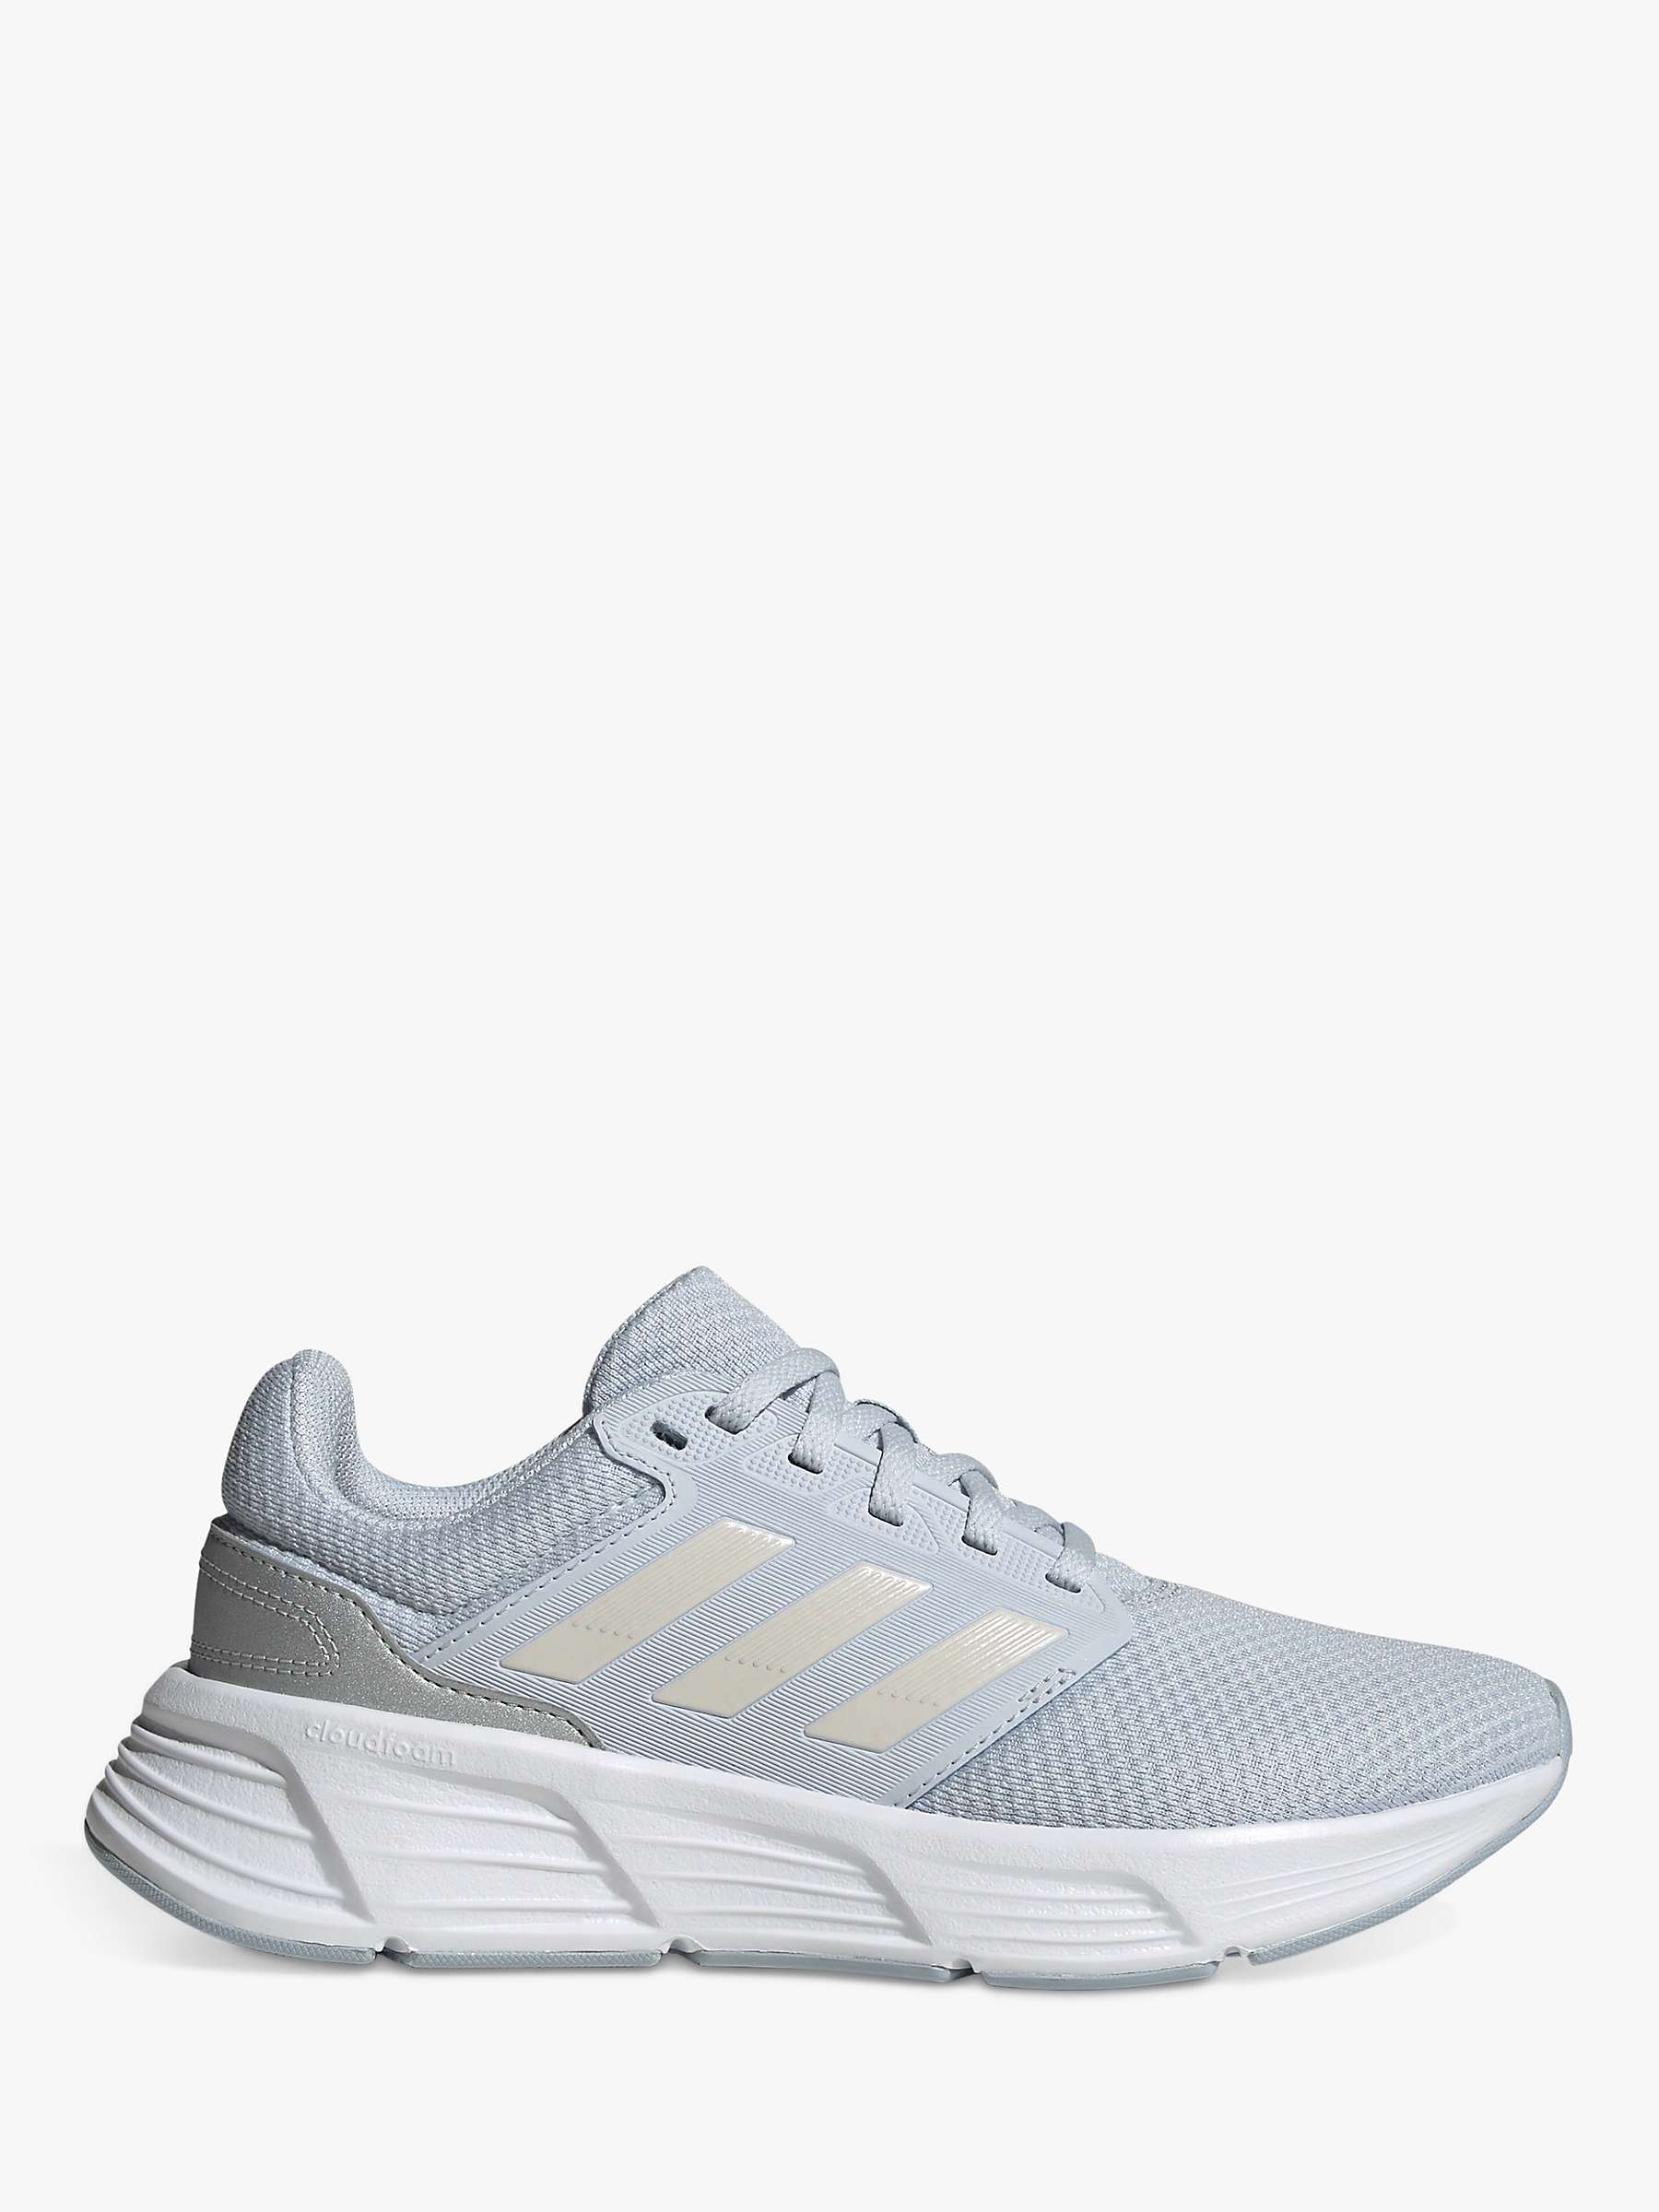 Buy adidas Women's Galaxy 6 Cloudfoam Trainers Online at johnlewis.com